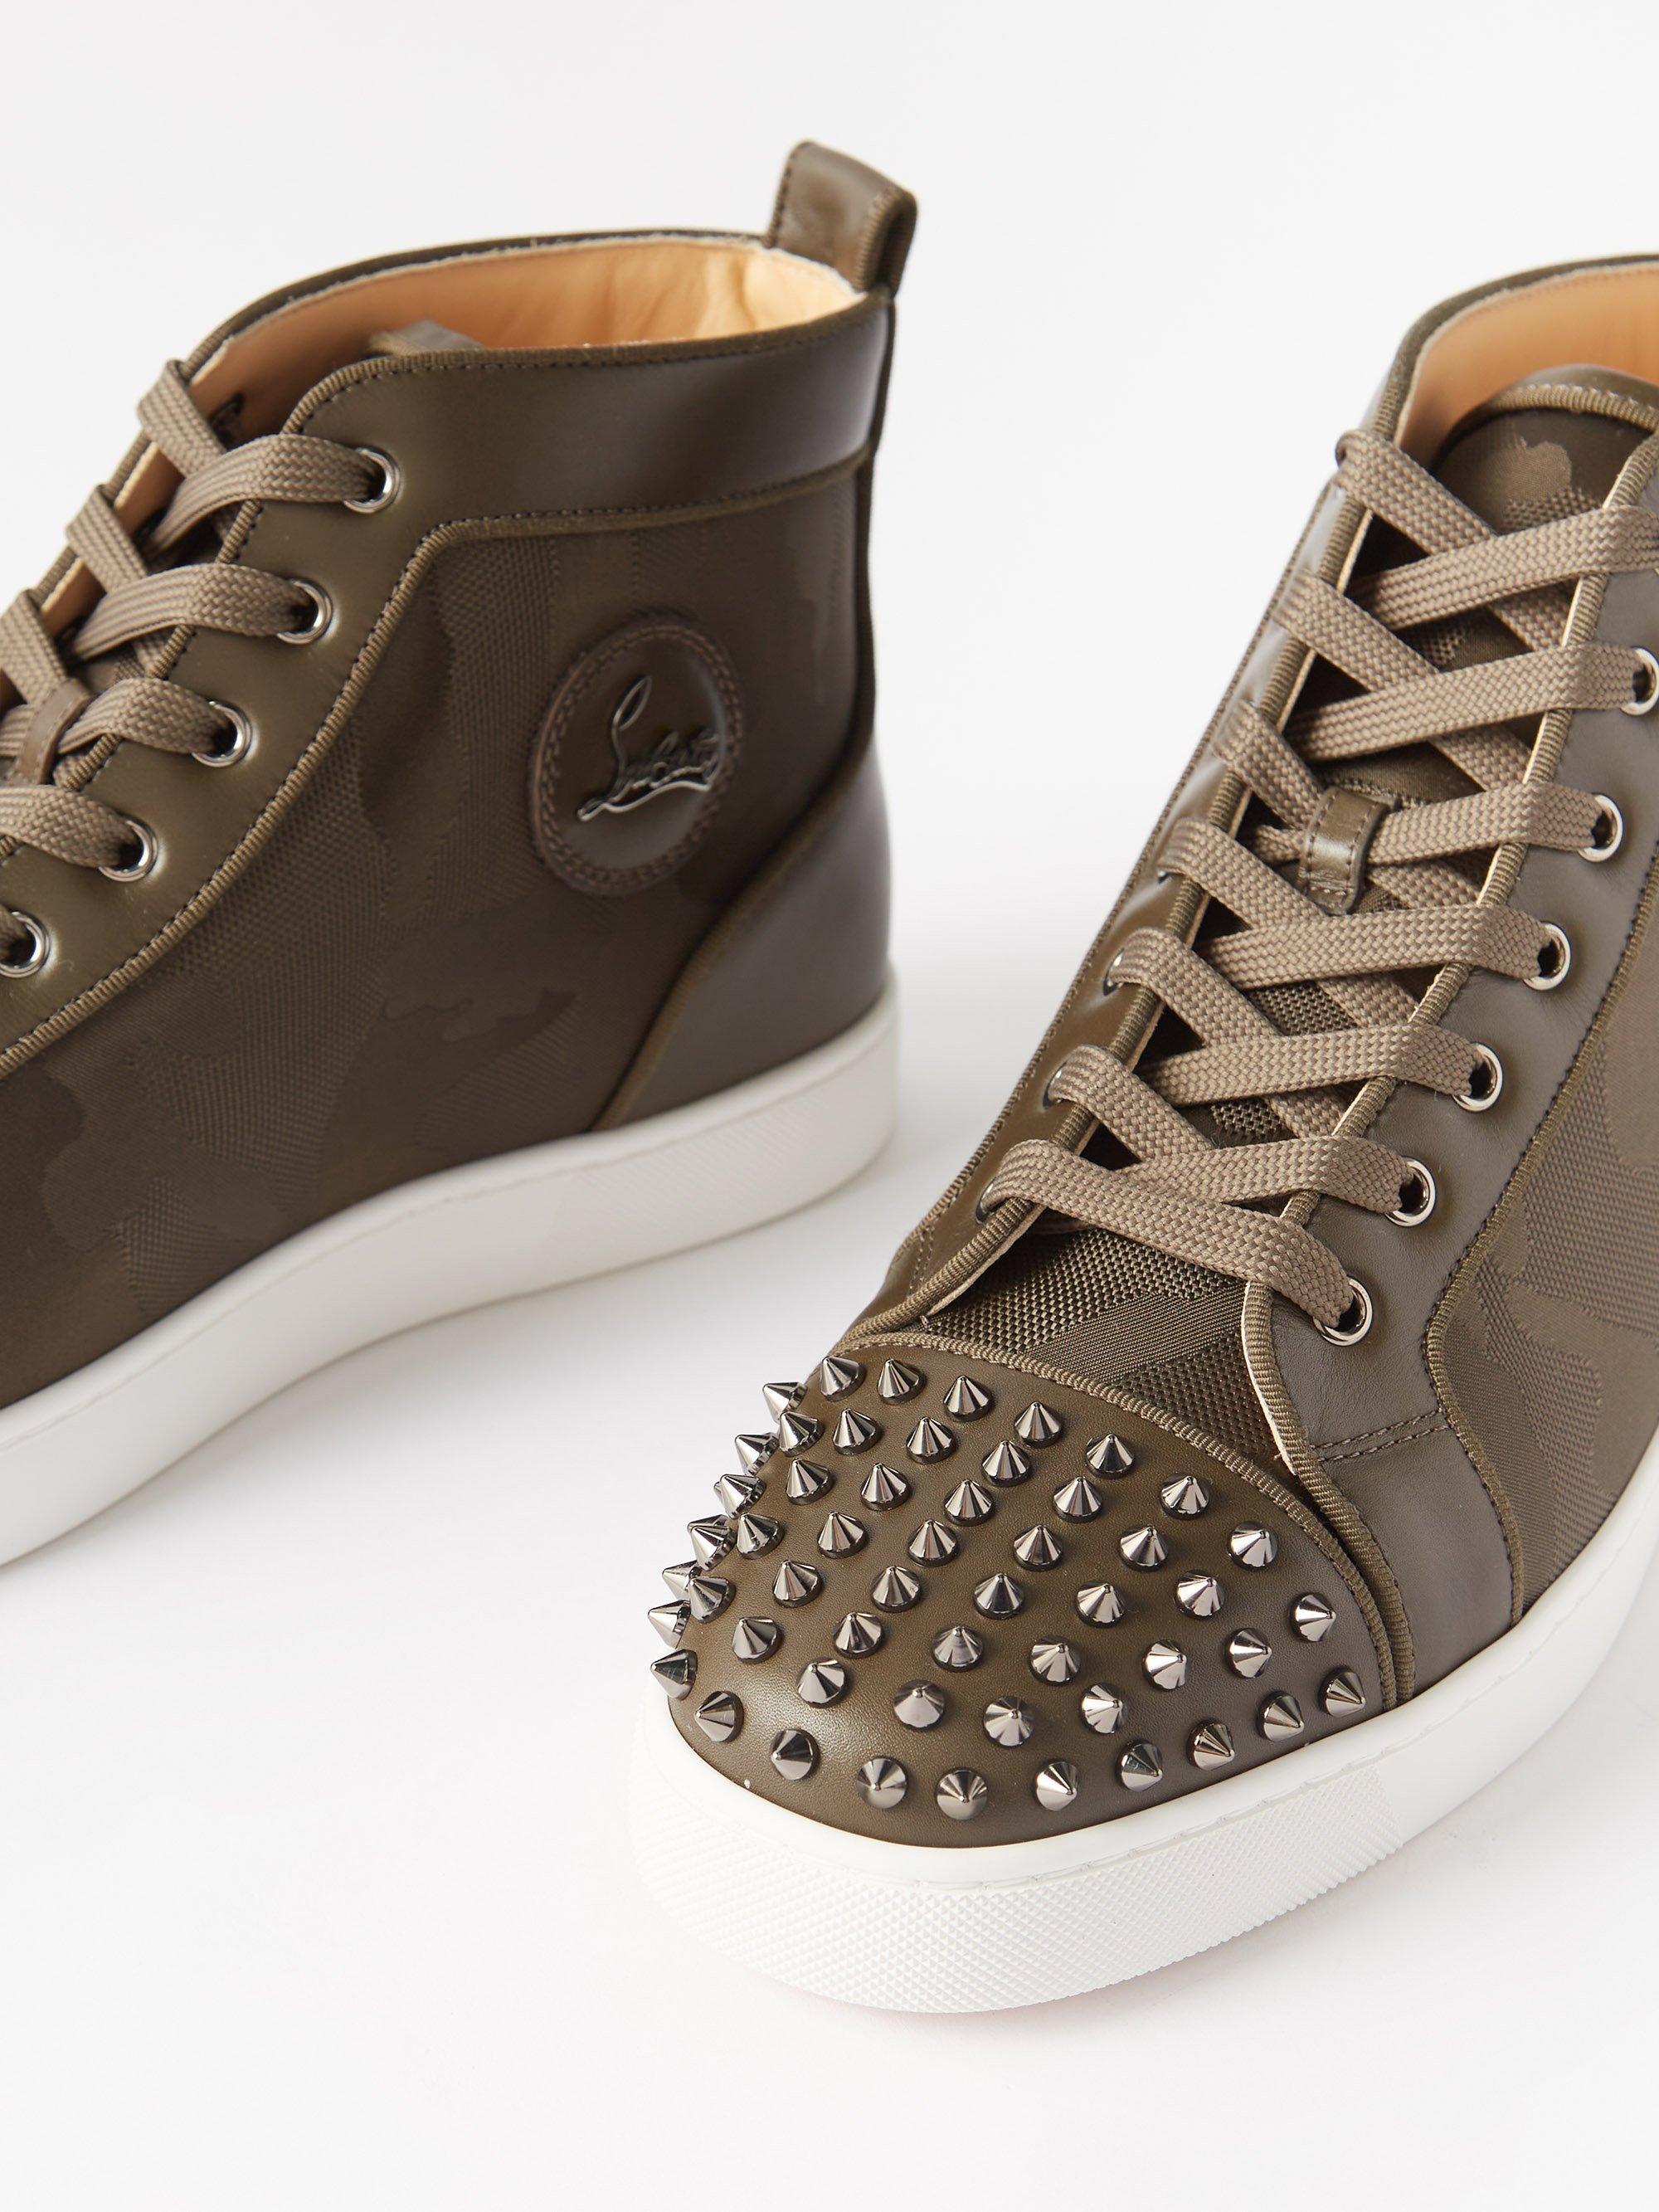 Mens Christian Louboutin High-Top Trainers